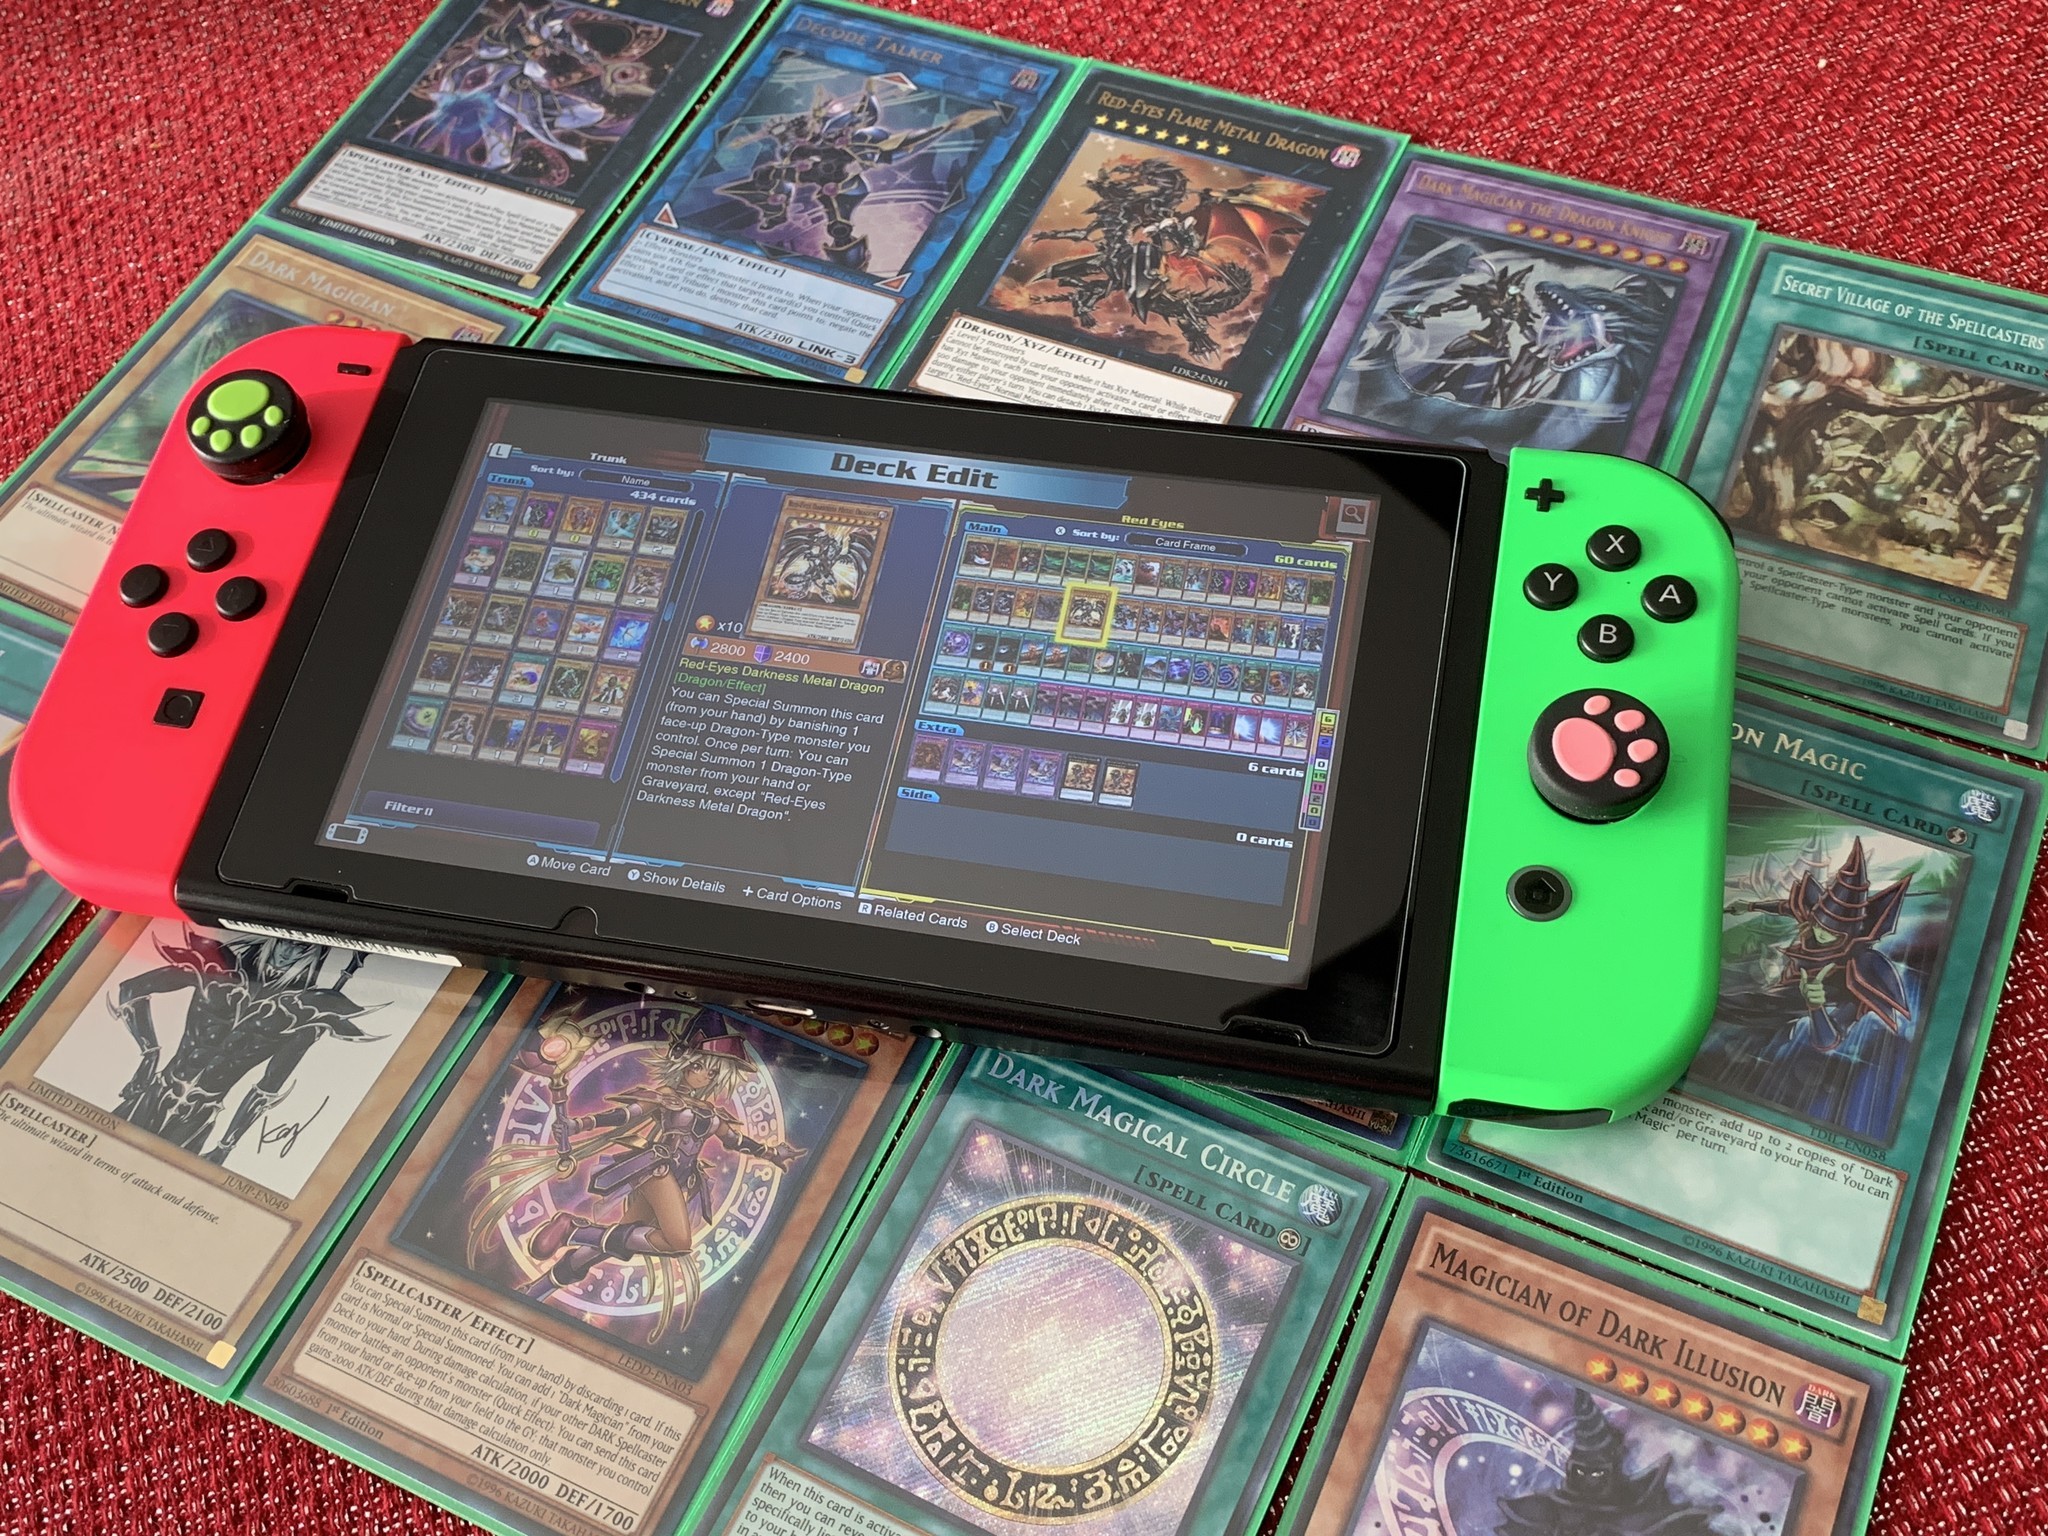 Yu-Gi-Oh! Legacy of the Duelist Link Evolution - Nintendo Switch